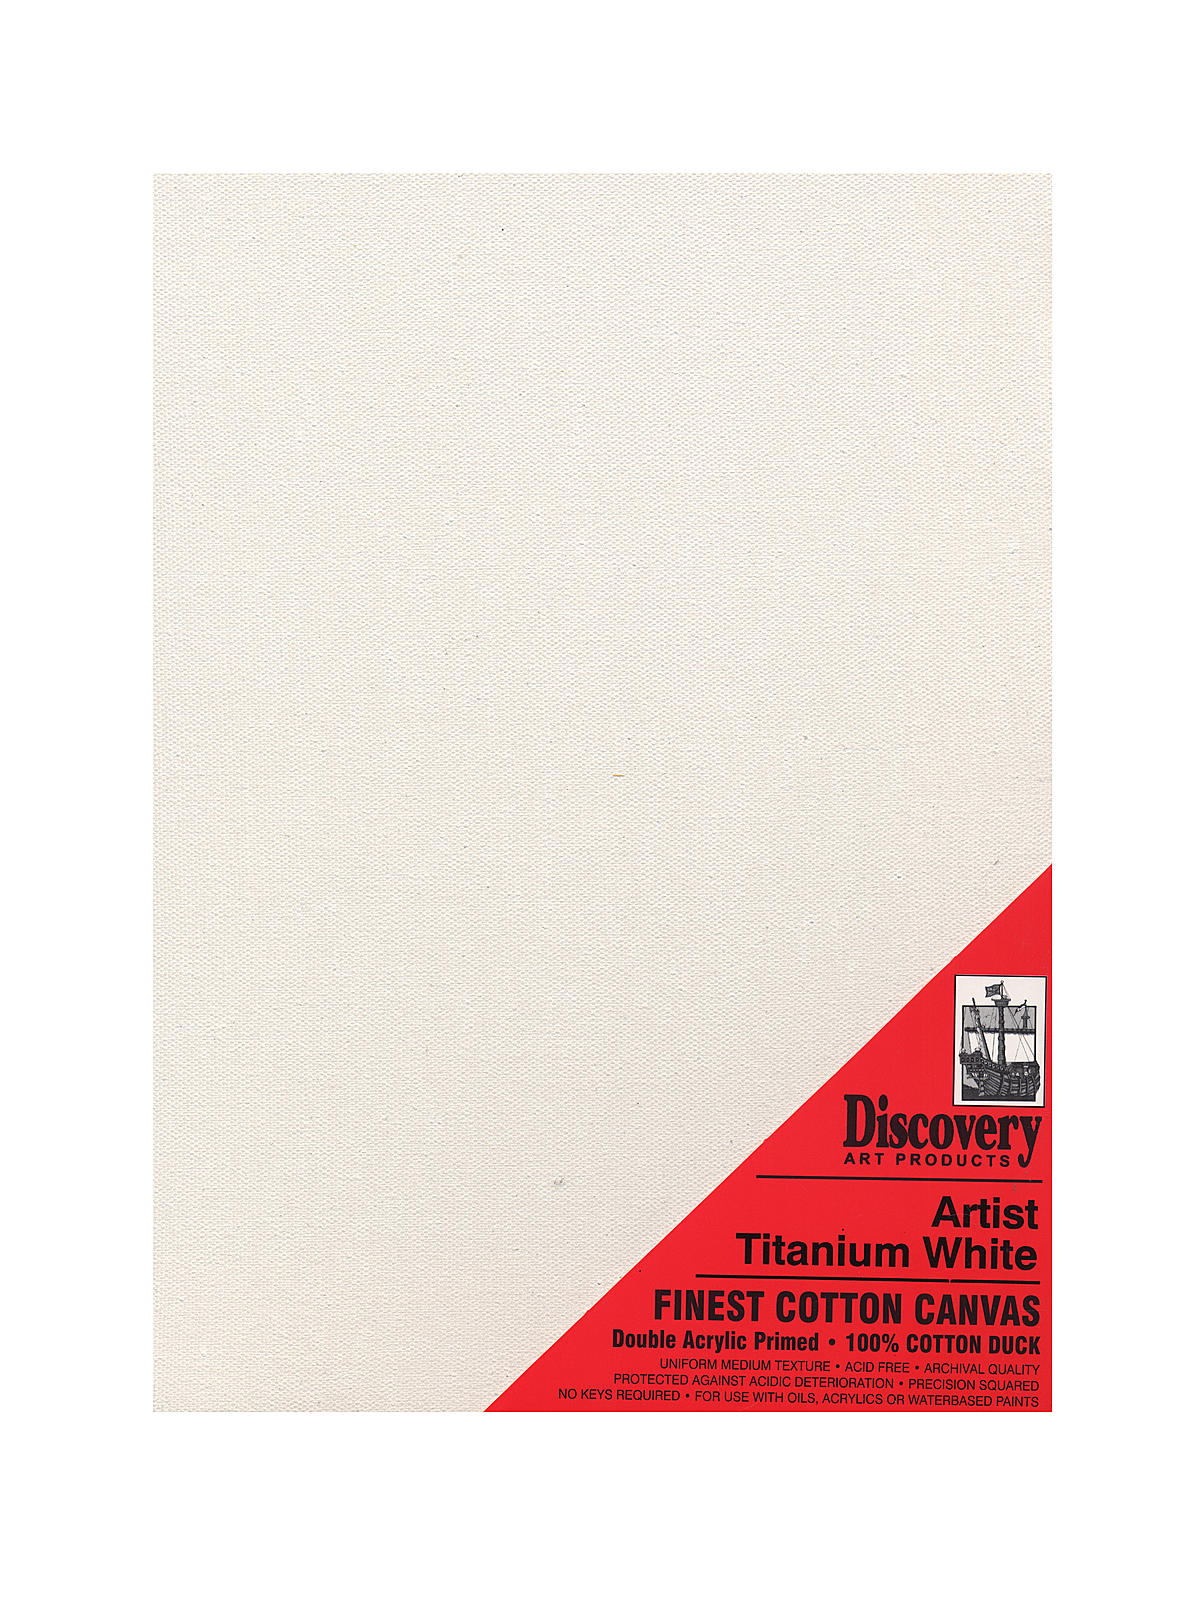 Finest Stretched Cotton Canvas White 14 In. X 18 In. Each